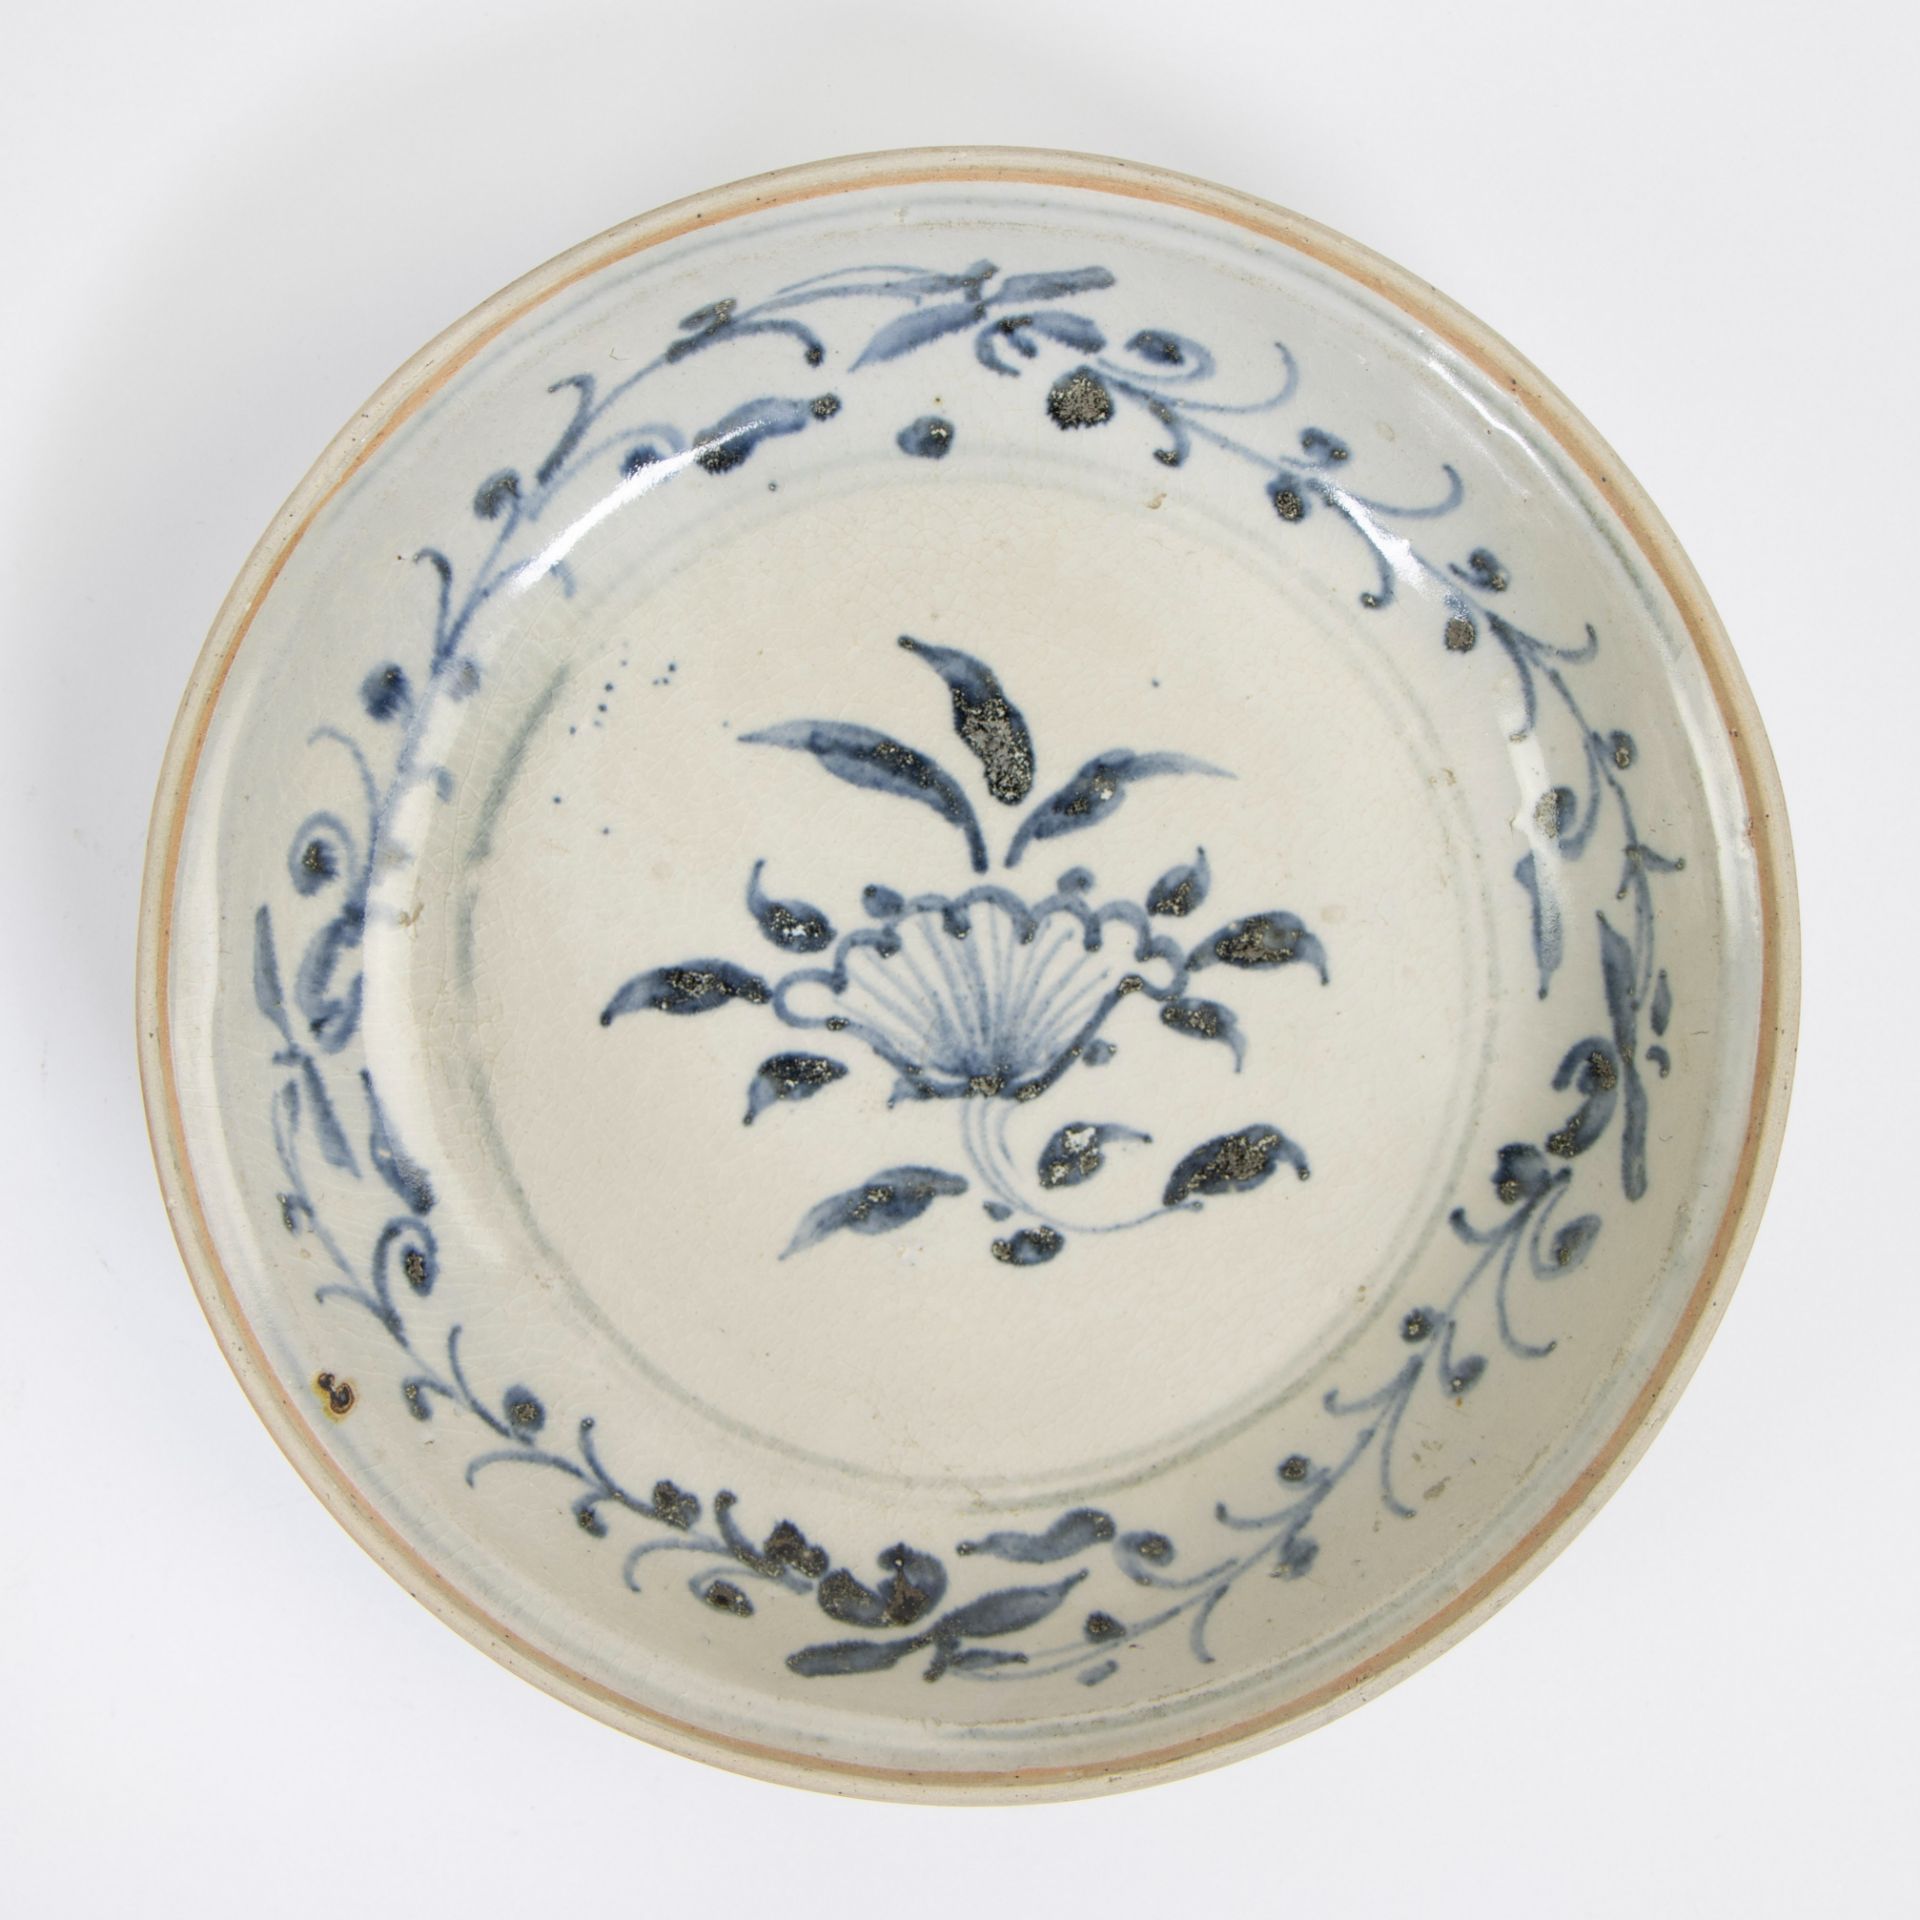 Ming plate in blue and white Chinese porcelain